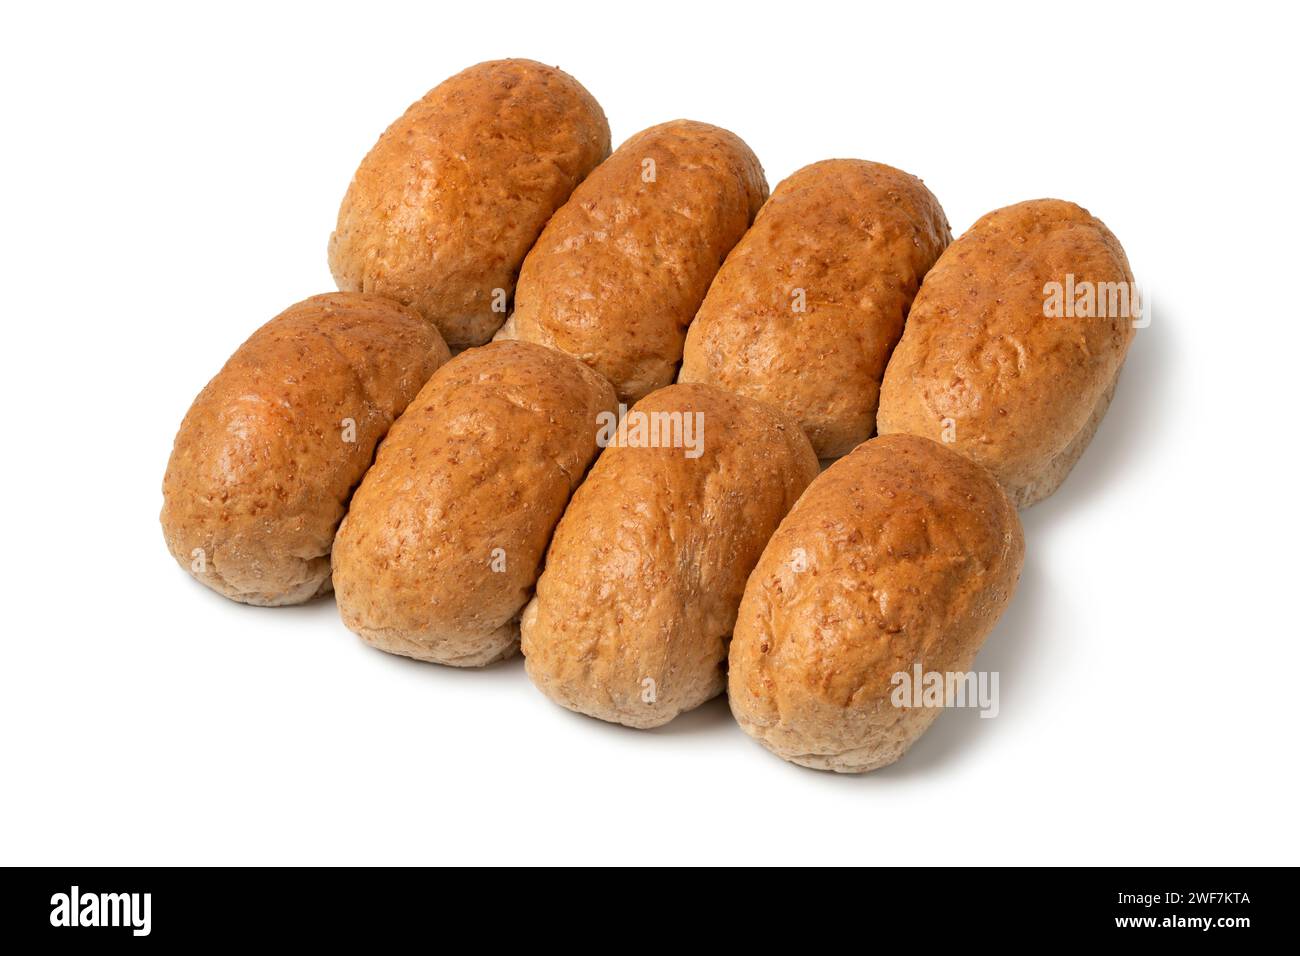 Row of of brown whole grain buns of bread close up isolated on white background Stock Photo